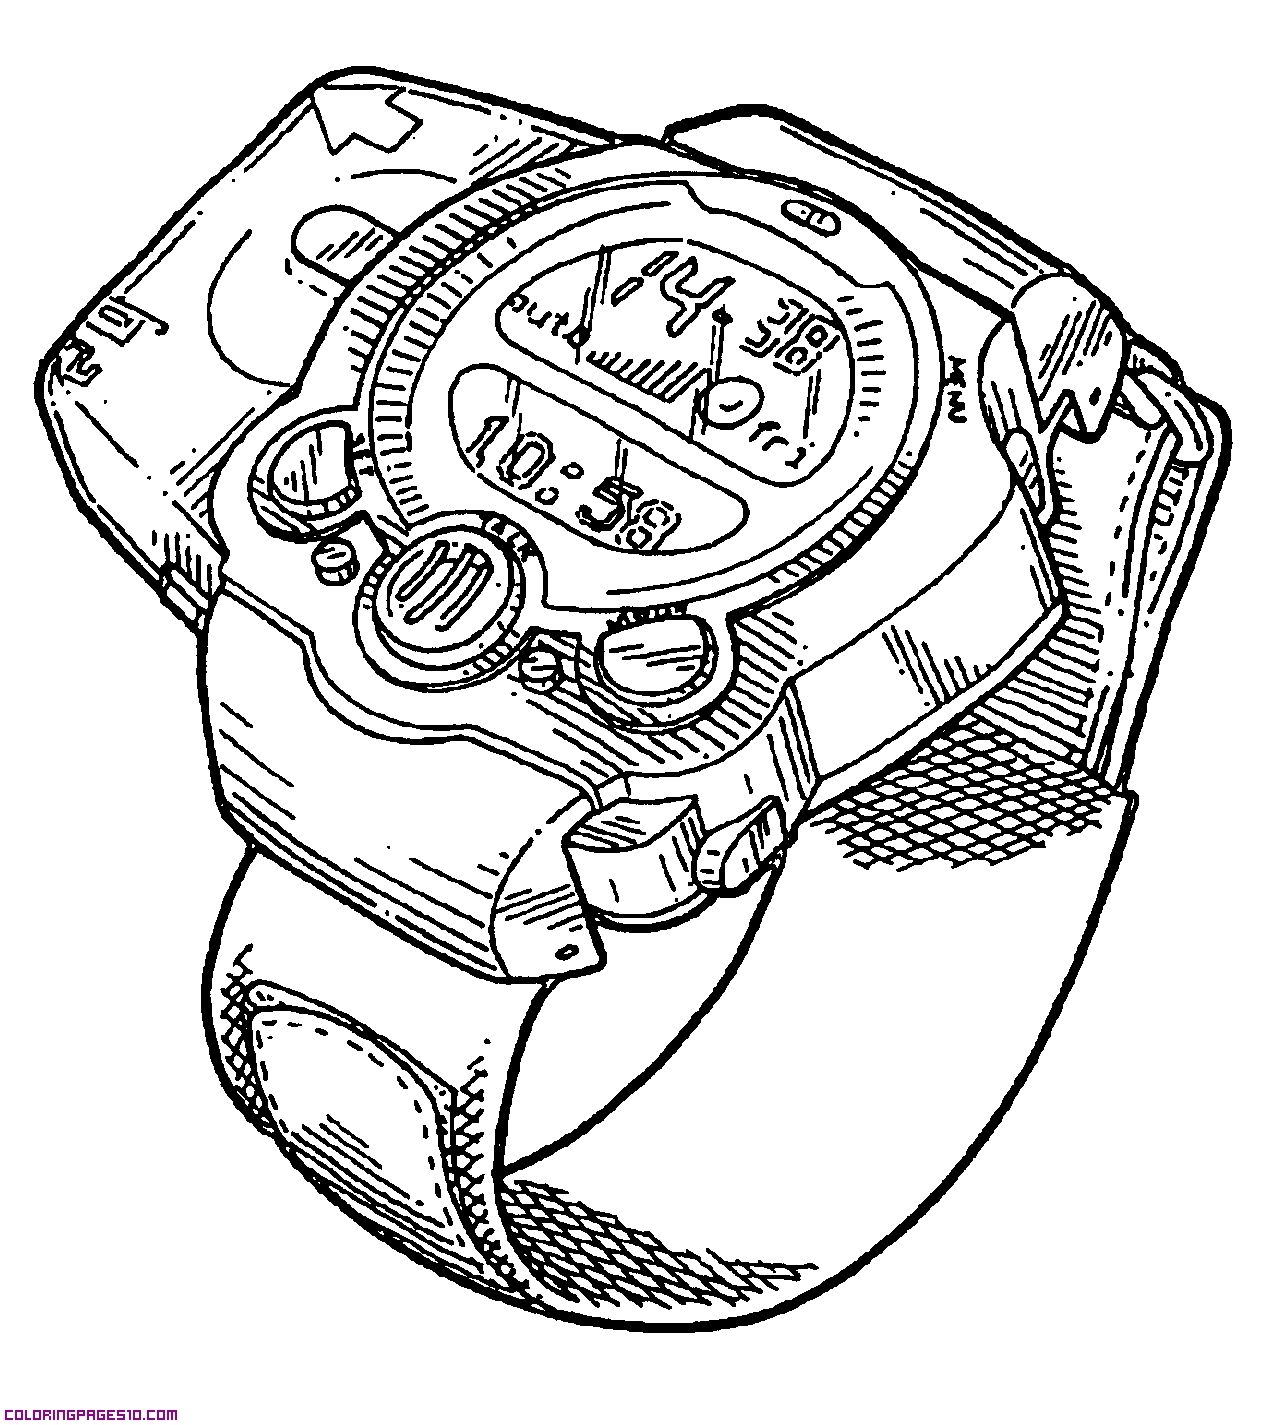 Animal Watch Coloring Page with simple drawing